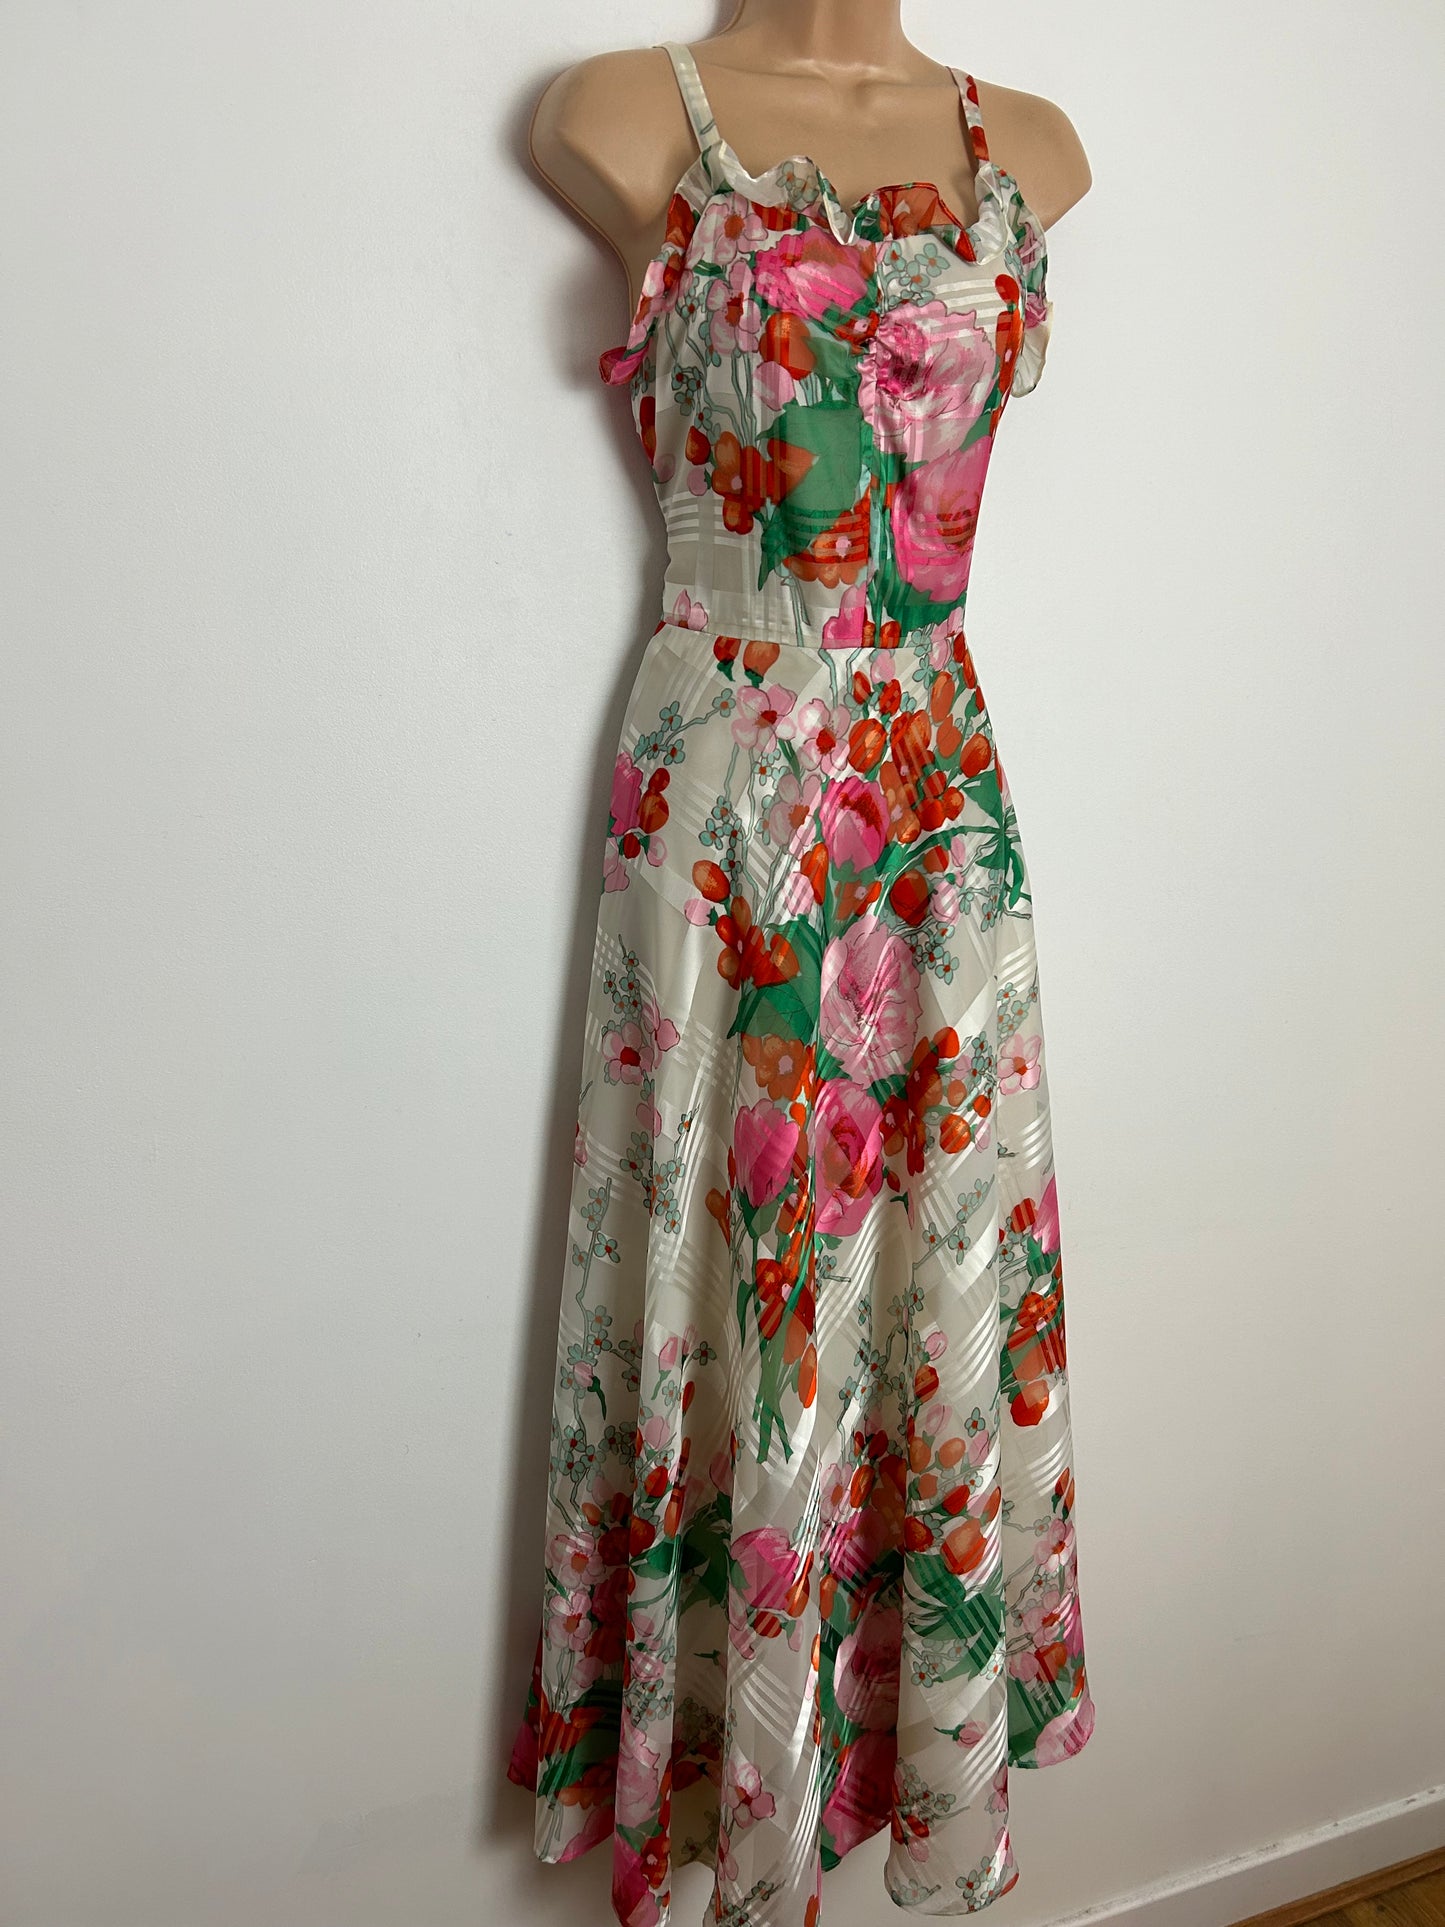 Vintage 1970's UK Size 8 Pretty Ivory White Pink Red & Green Floral Print Summer Boho Maxi Dress